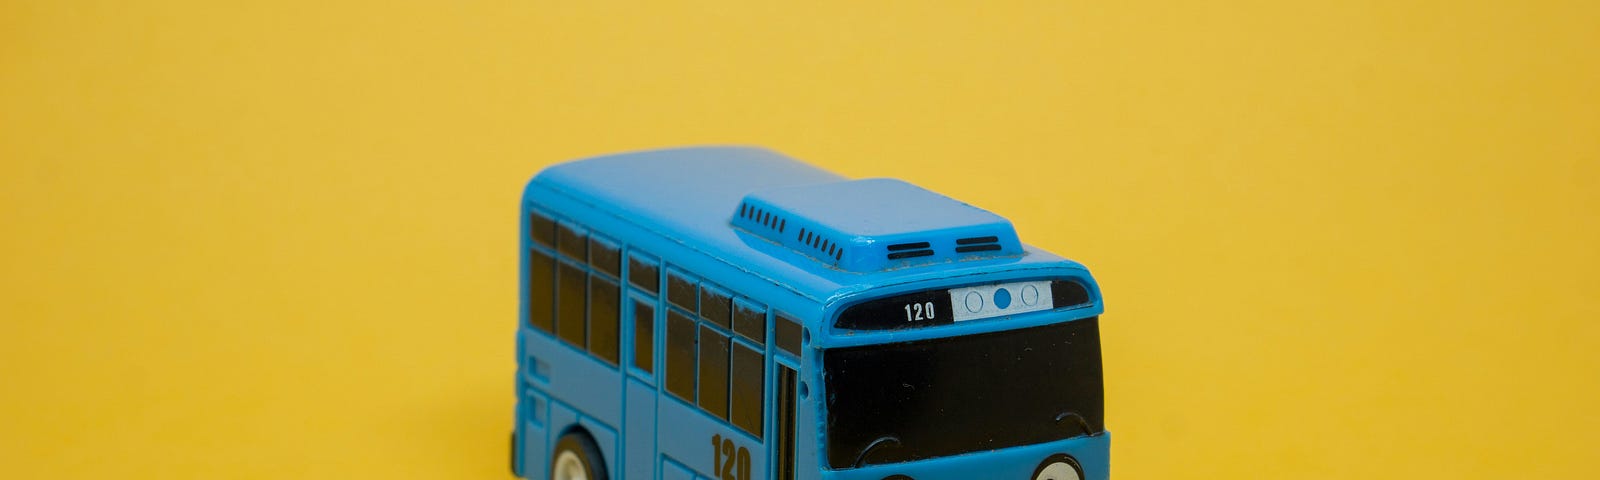 Blue toy bus